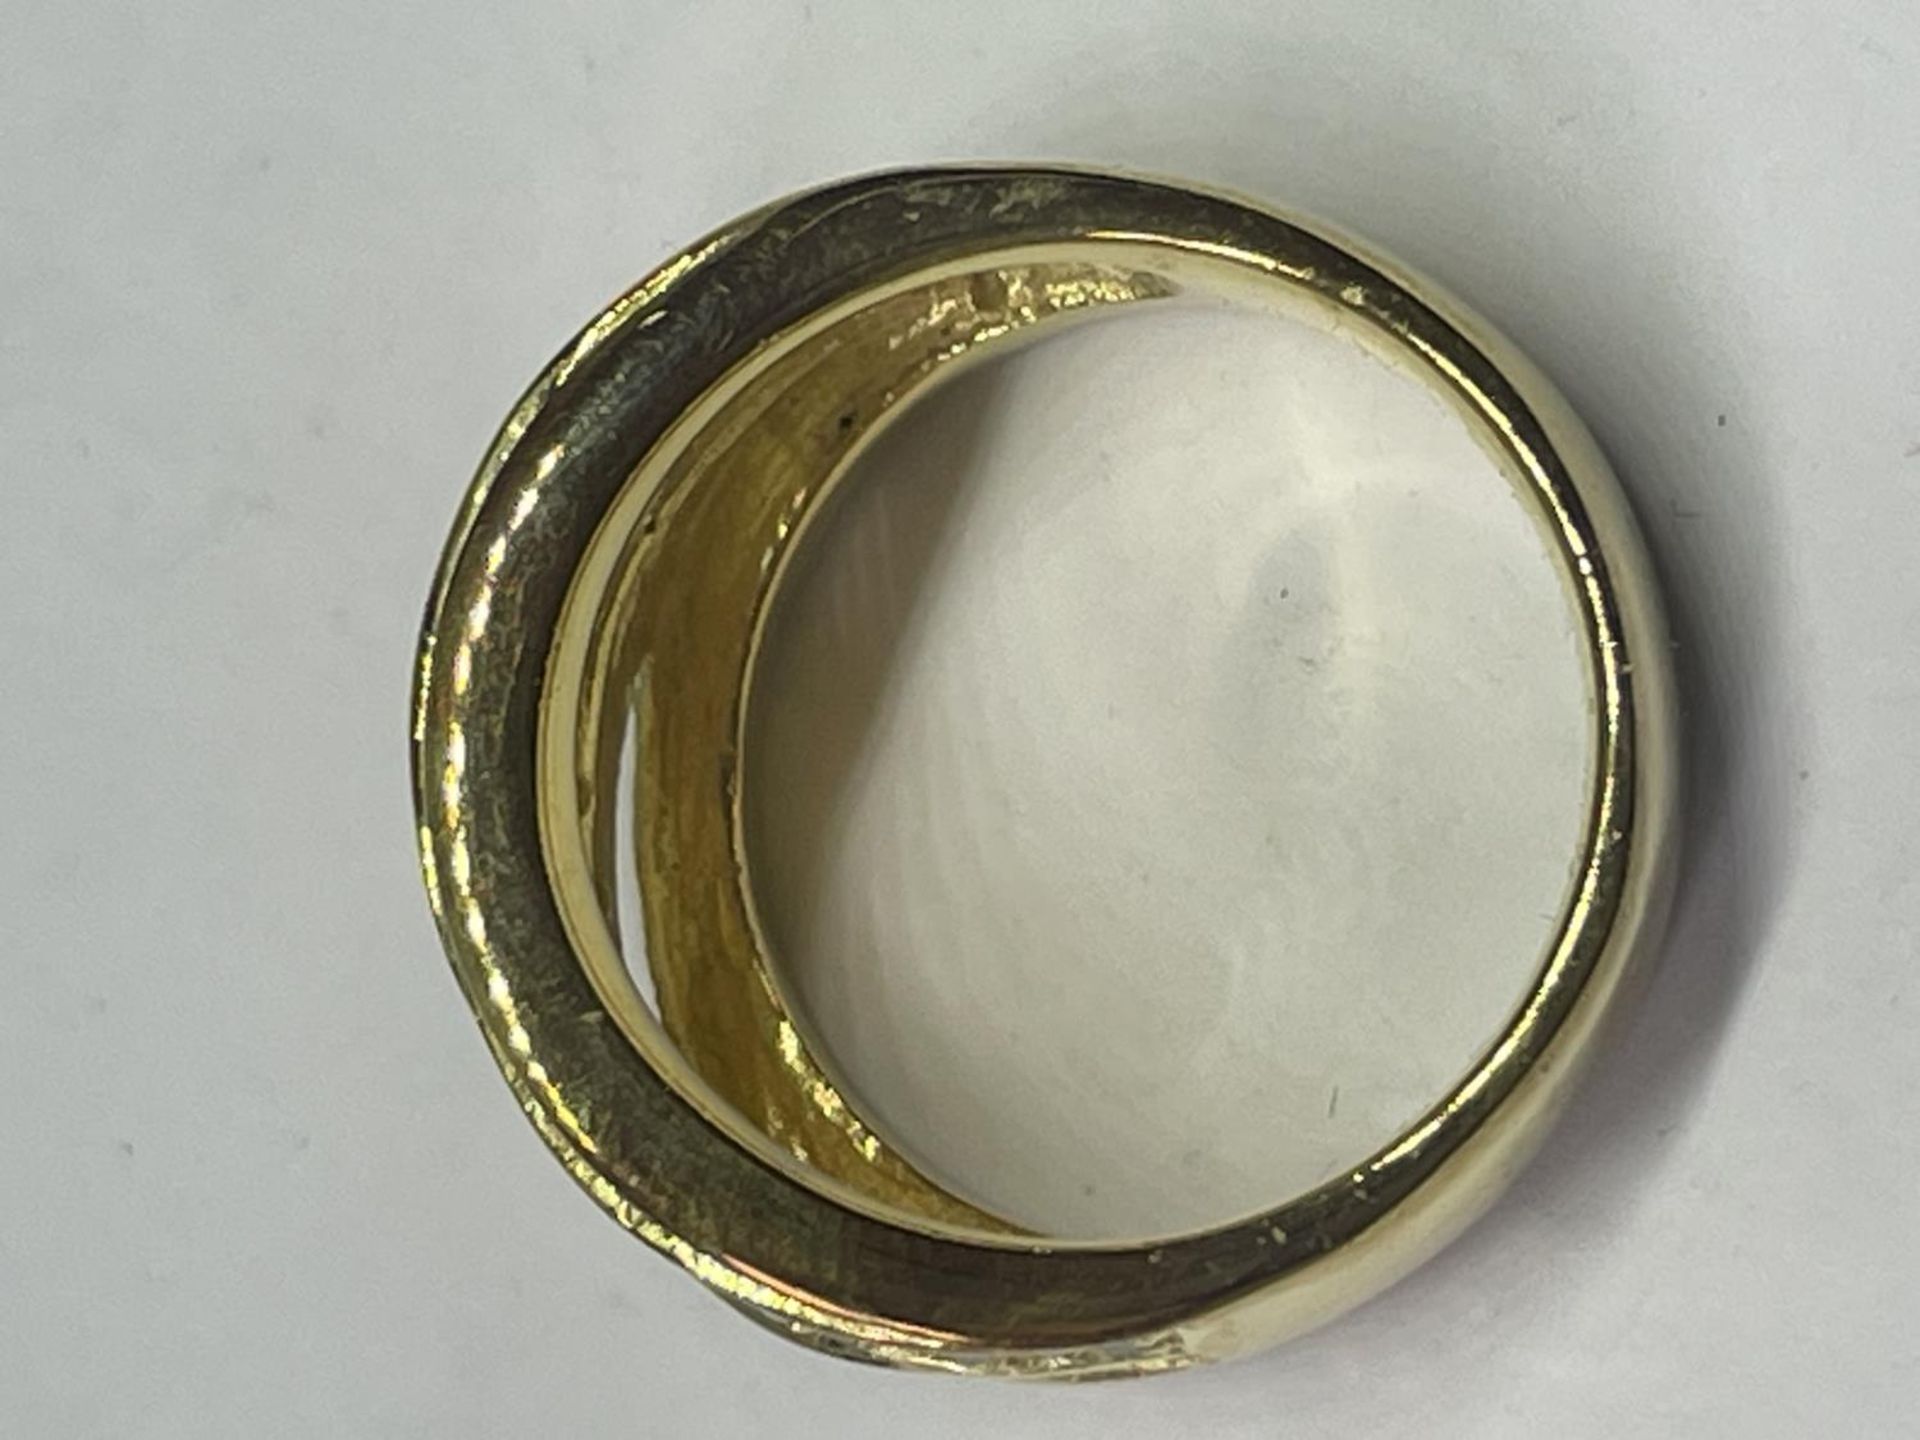 A SILVER GILT RING IN A PRESENTATION BOX - Image 4 of 4